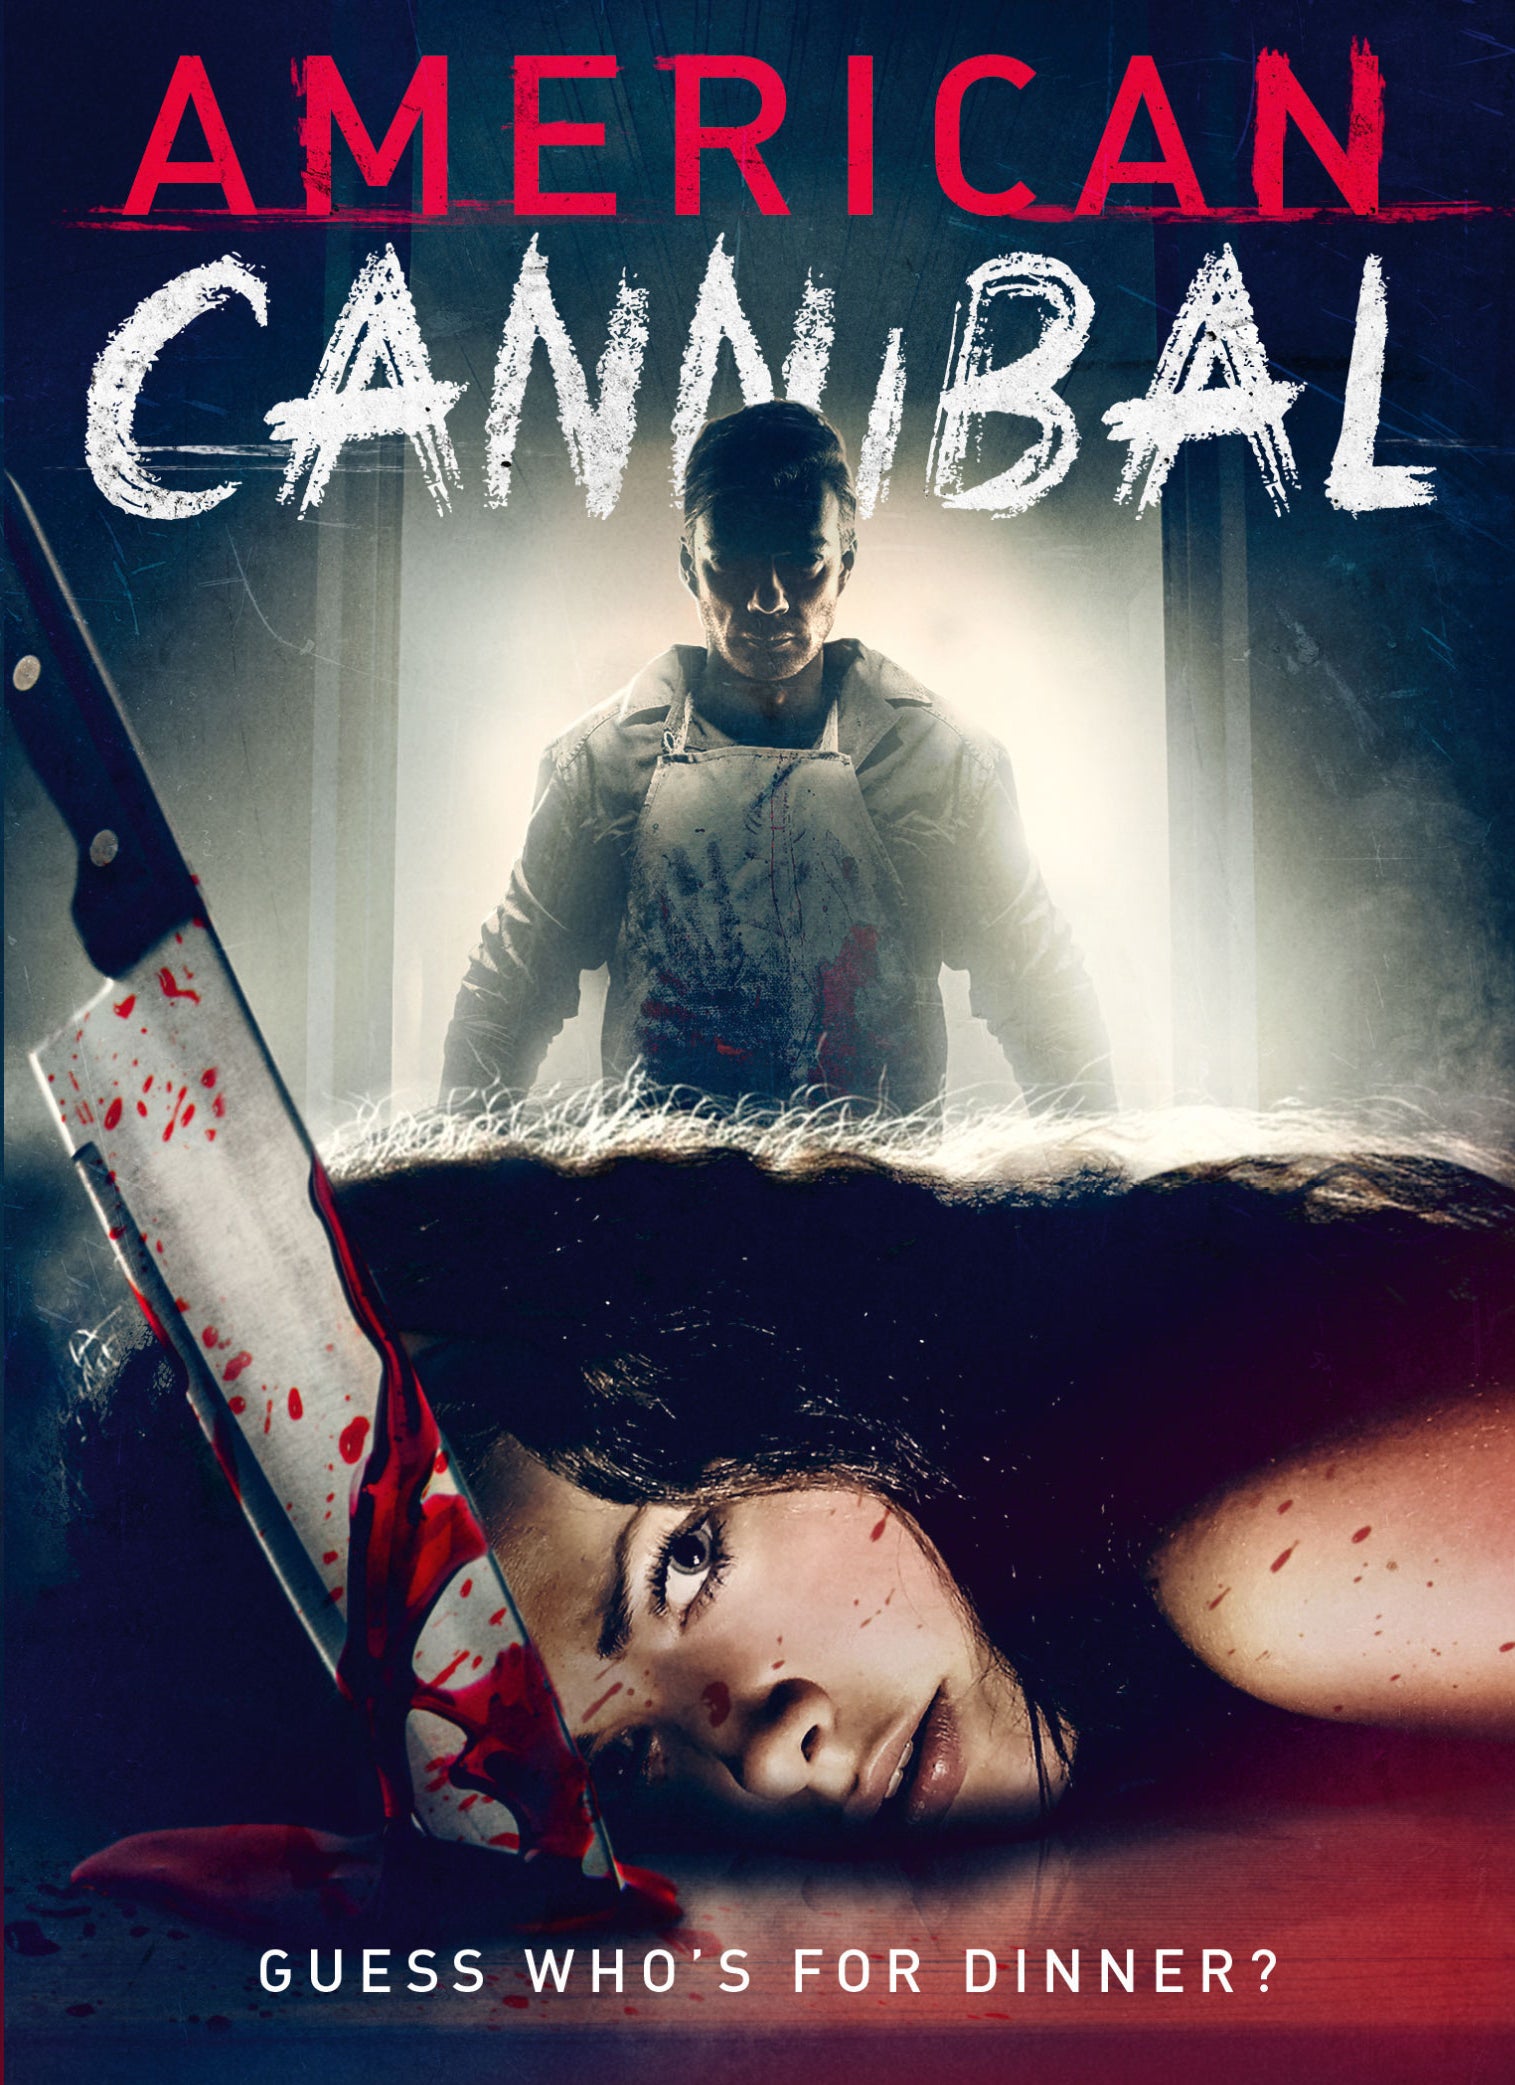 American Cannibal cover art